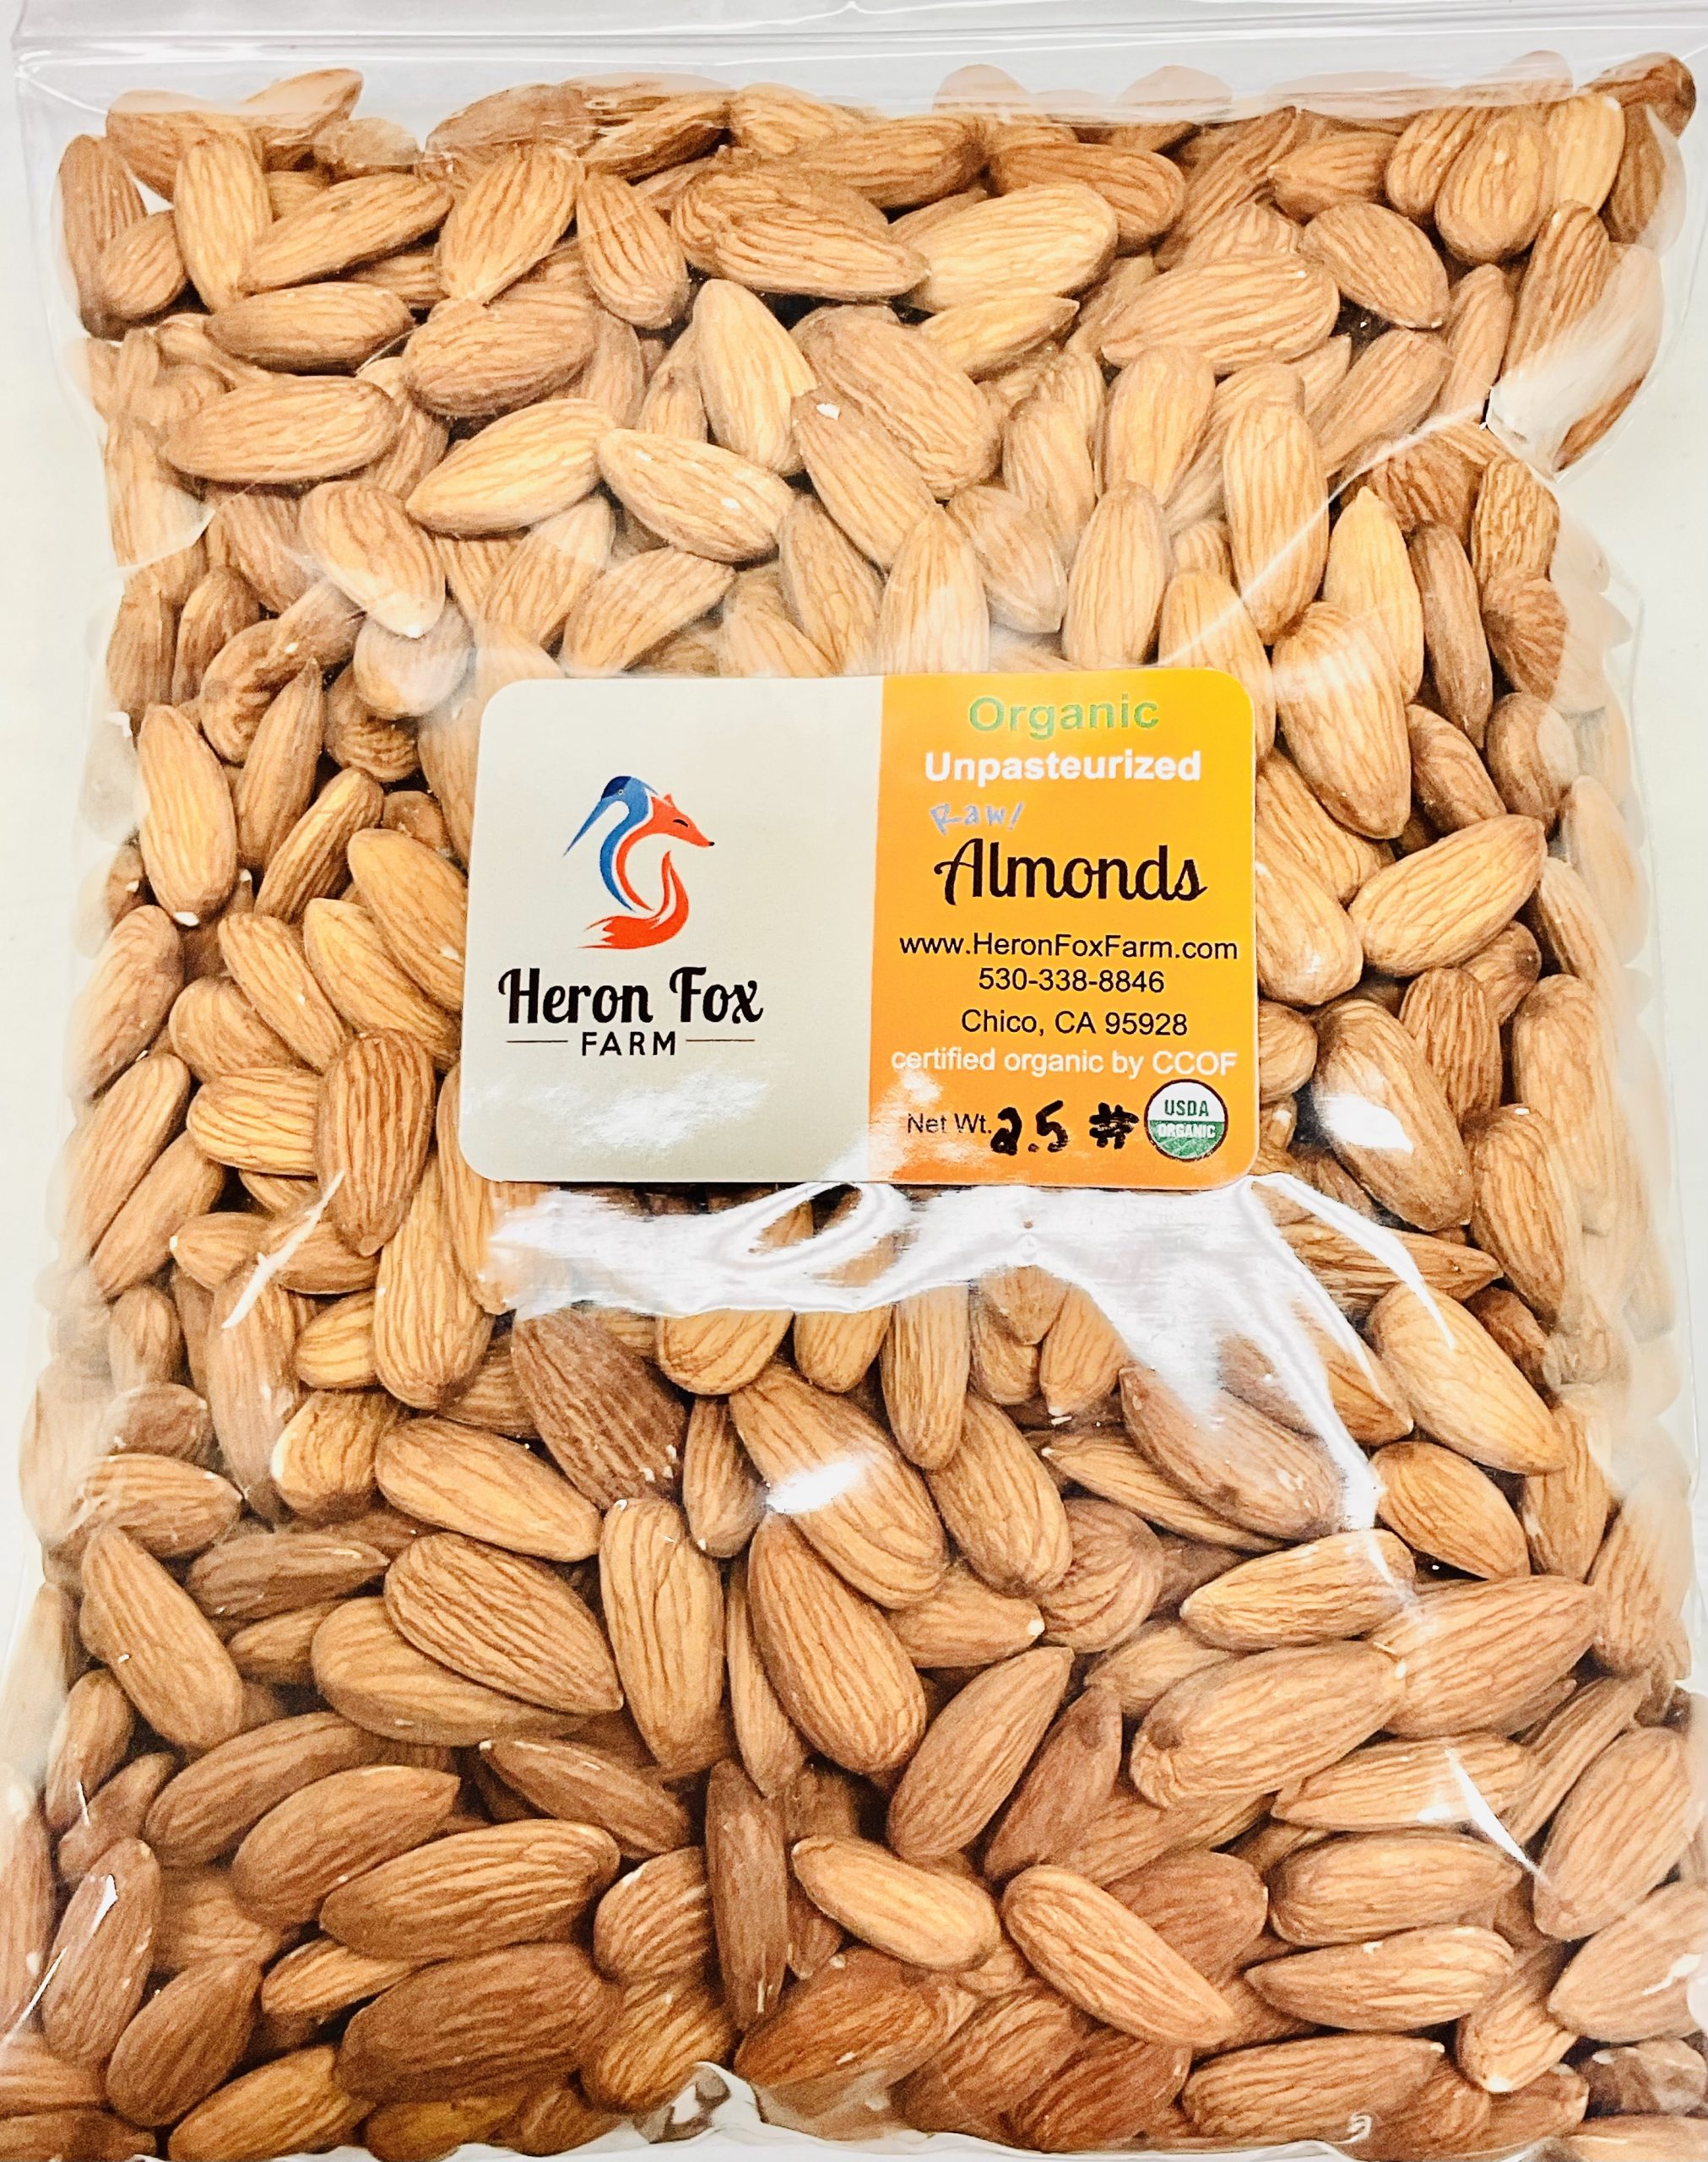 Organic unpasteurized almonds 2.5 pounds- FREE SHIPPING! 